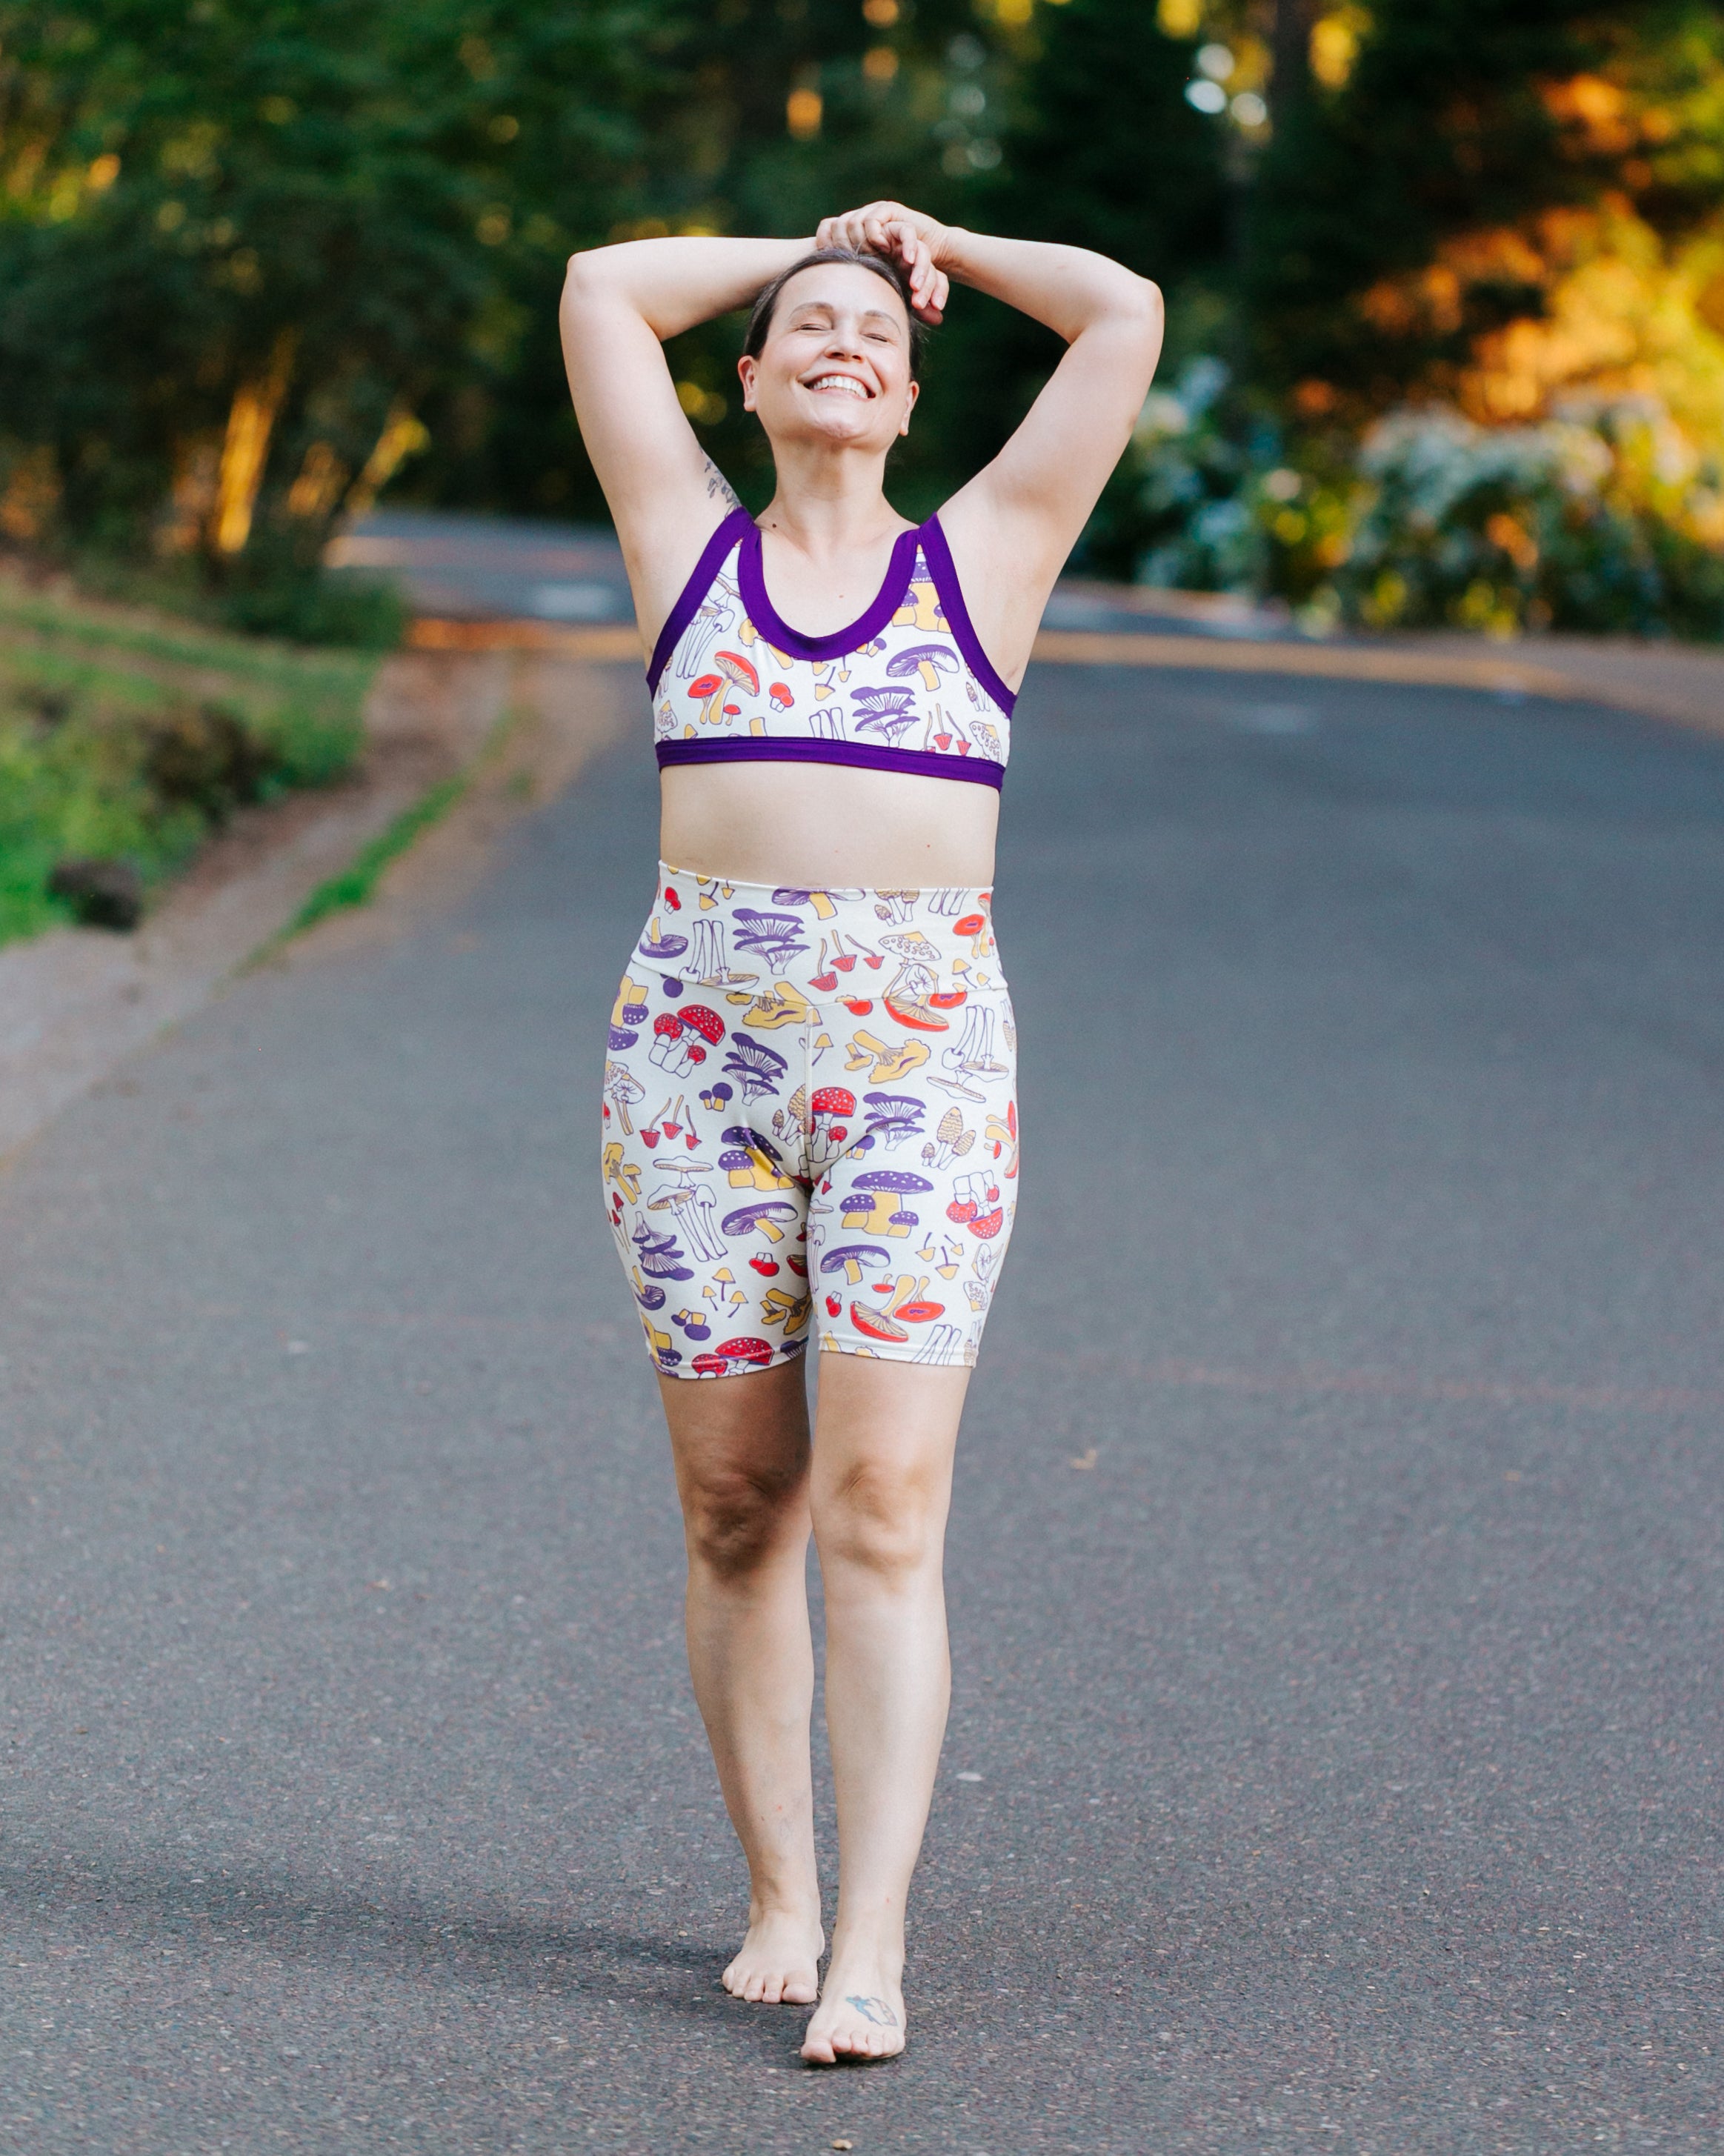 Model smiling big with her arms over her head wearing a set of Bike Shorts and Bralette in Mushroom Magic print: different kinds of mushrooms in yellow, red, and purple colors.